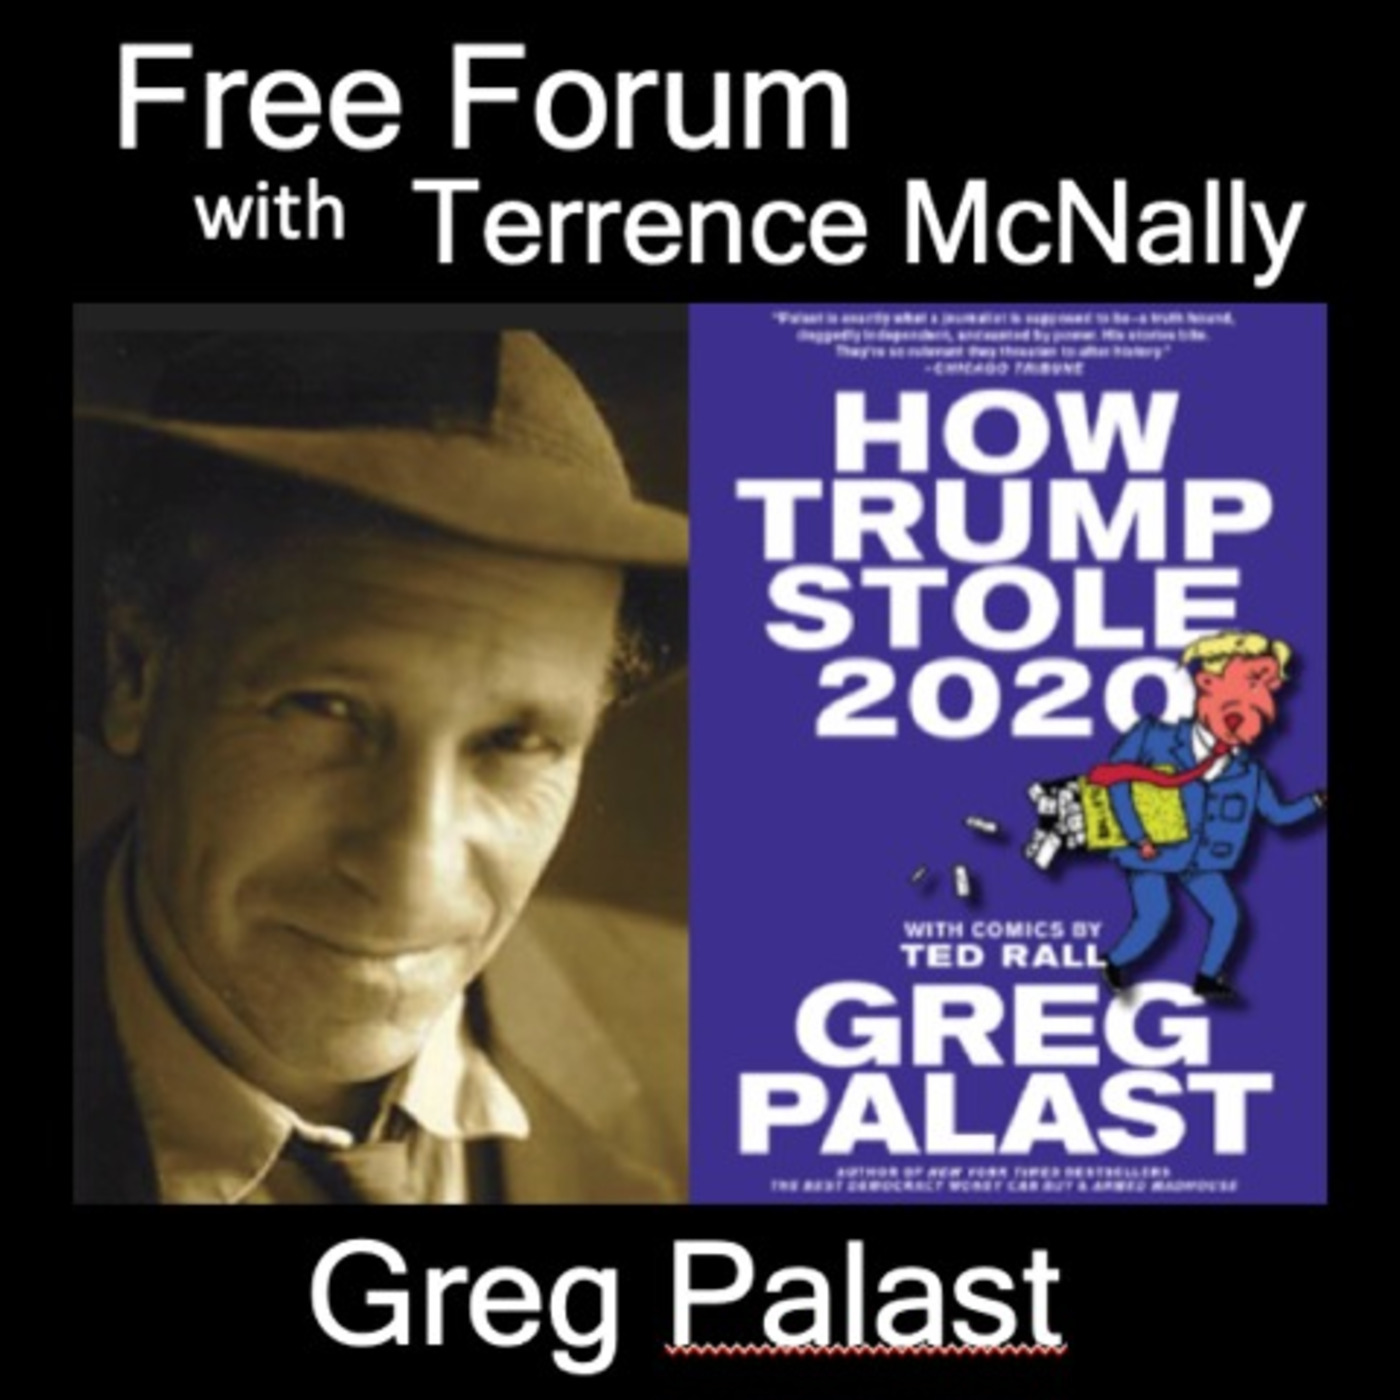 GREG PALAST-You’ve been warned-HOW TRUMP STOLE 2020 ELECTION